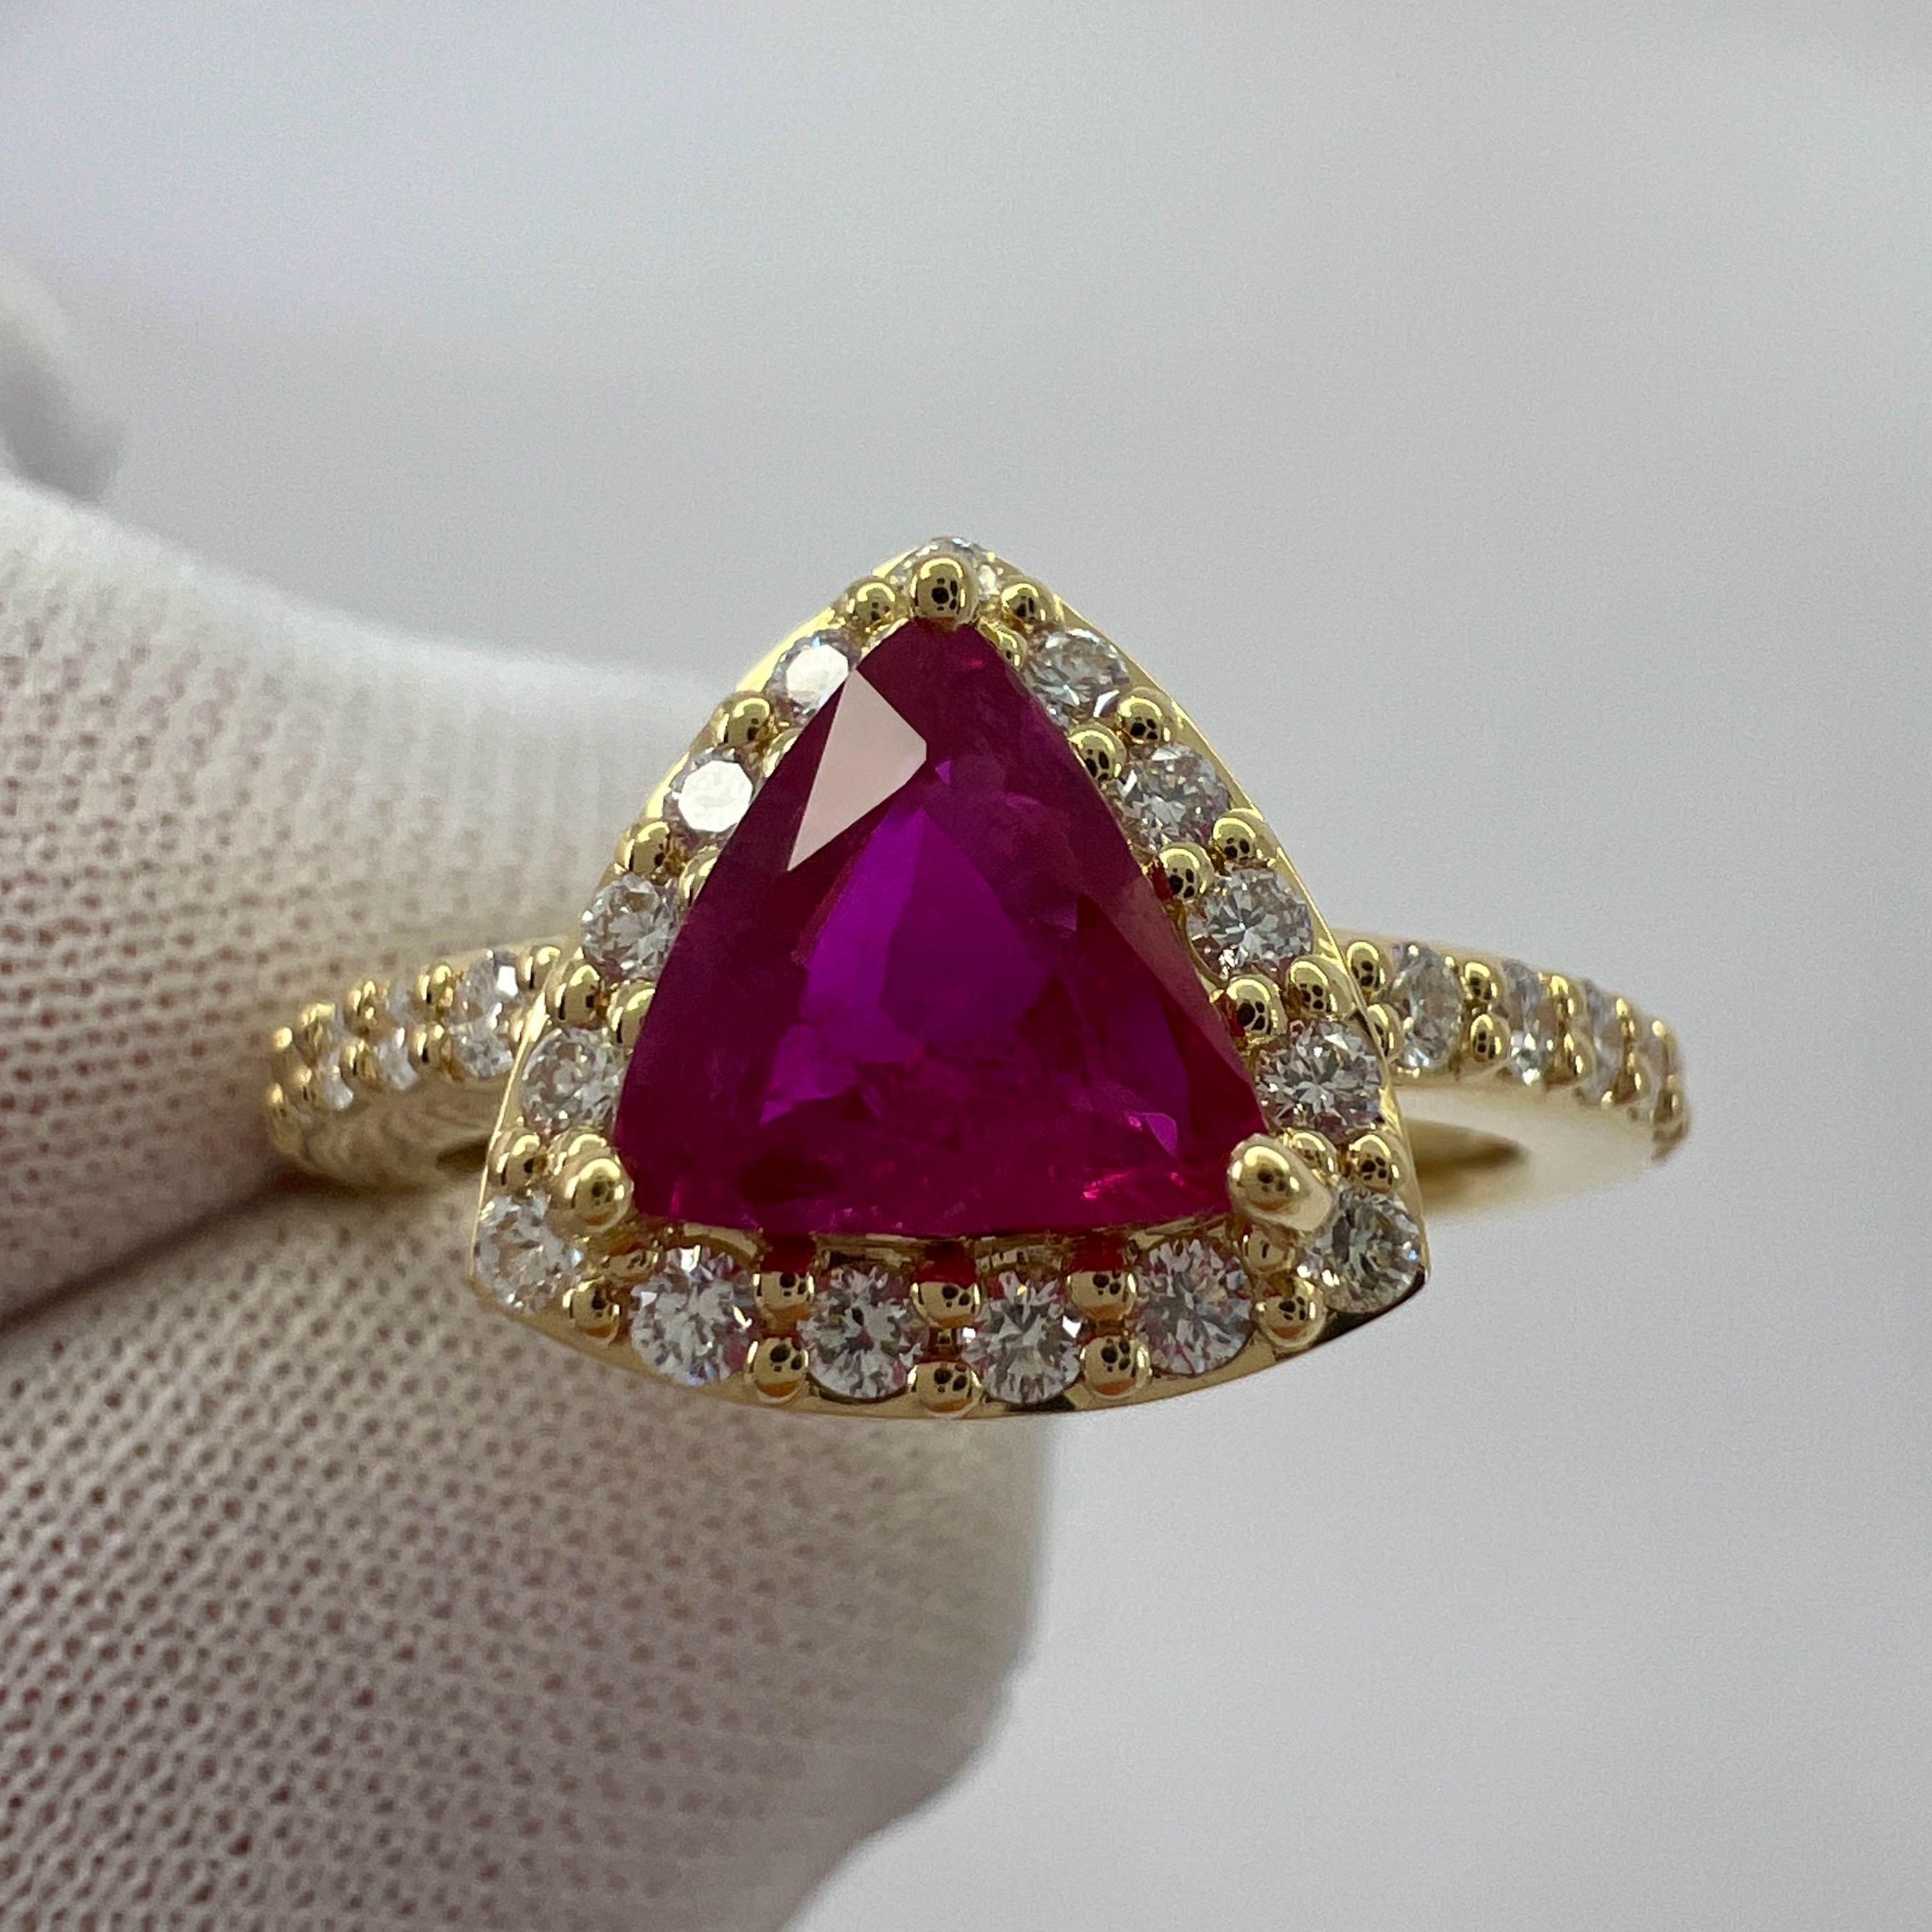 Certified 1.02ct No Heat Triangle Cut Ruby Diamond 18k Yellow Gold Cluster Ring For Sale 5